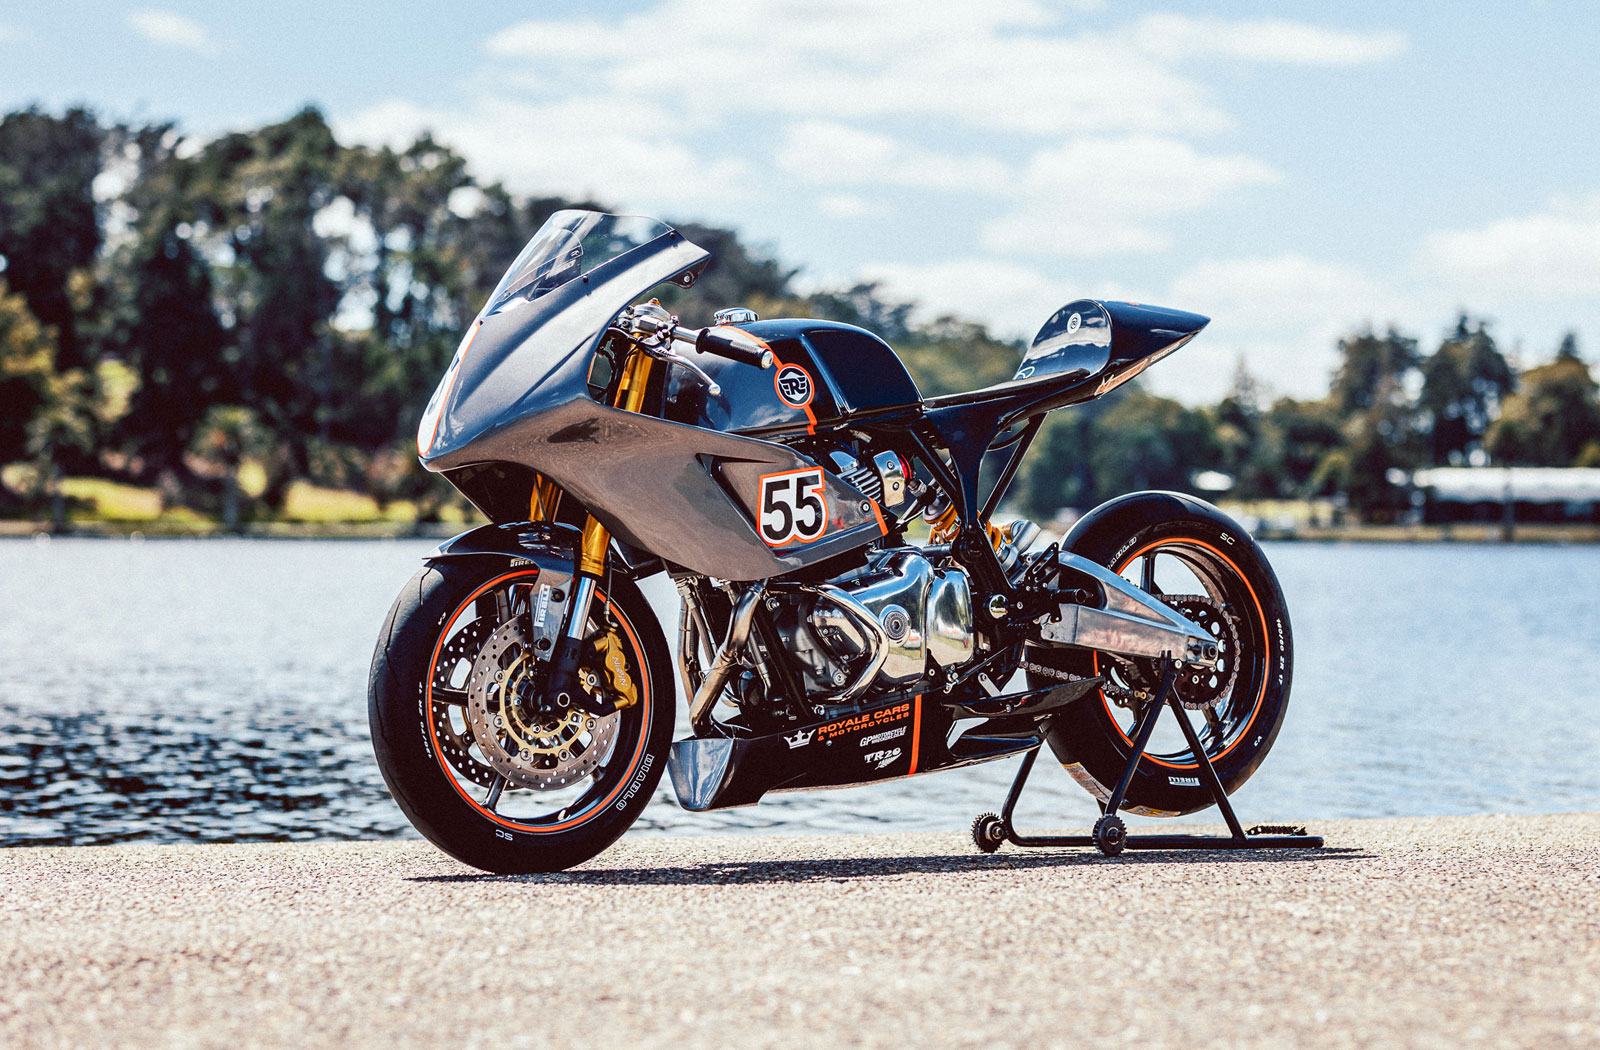 highly modified Continental GT650 racer